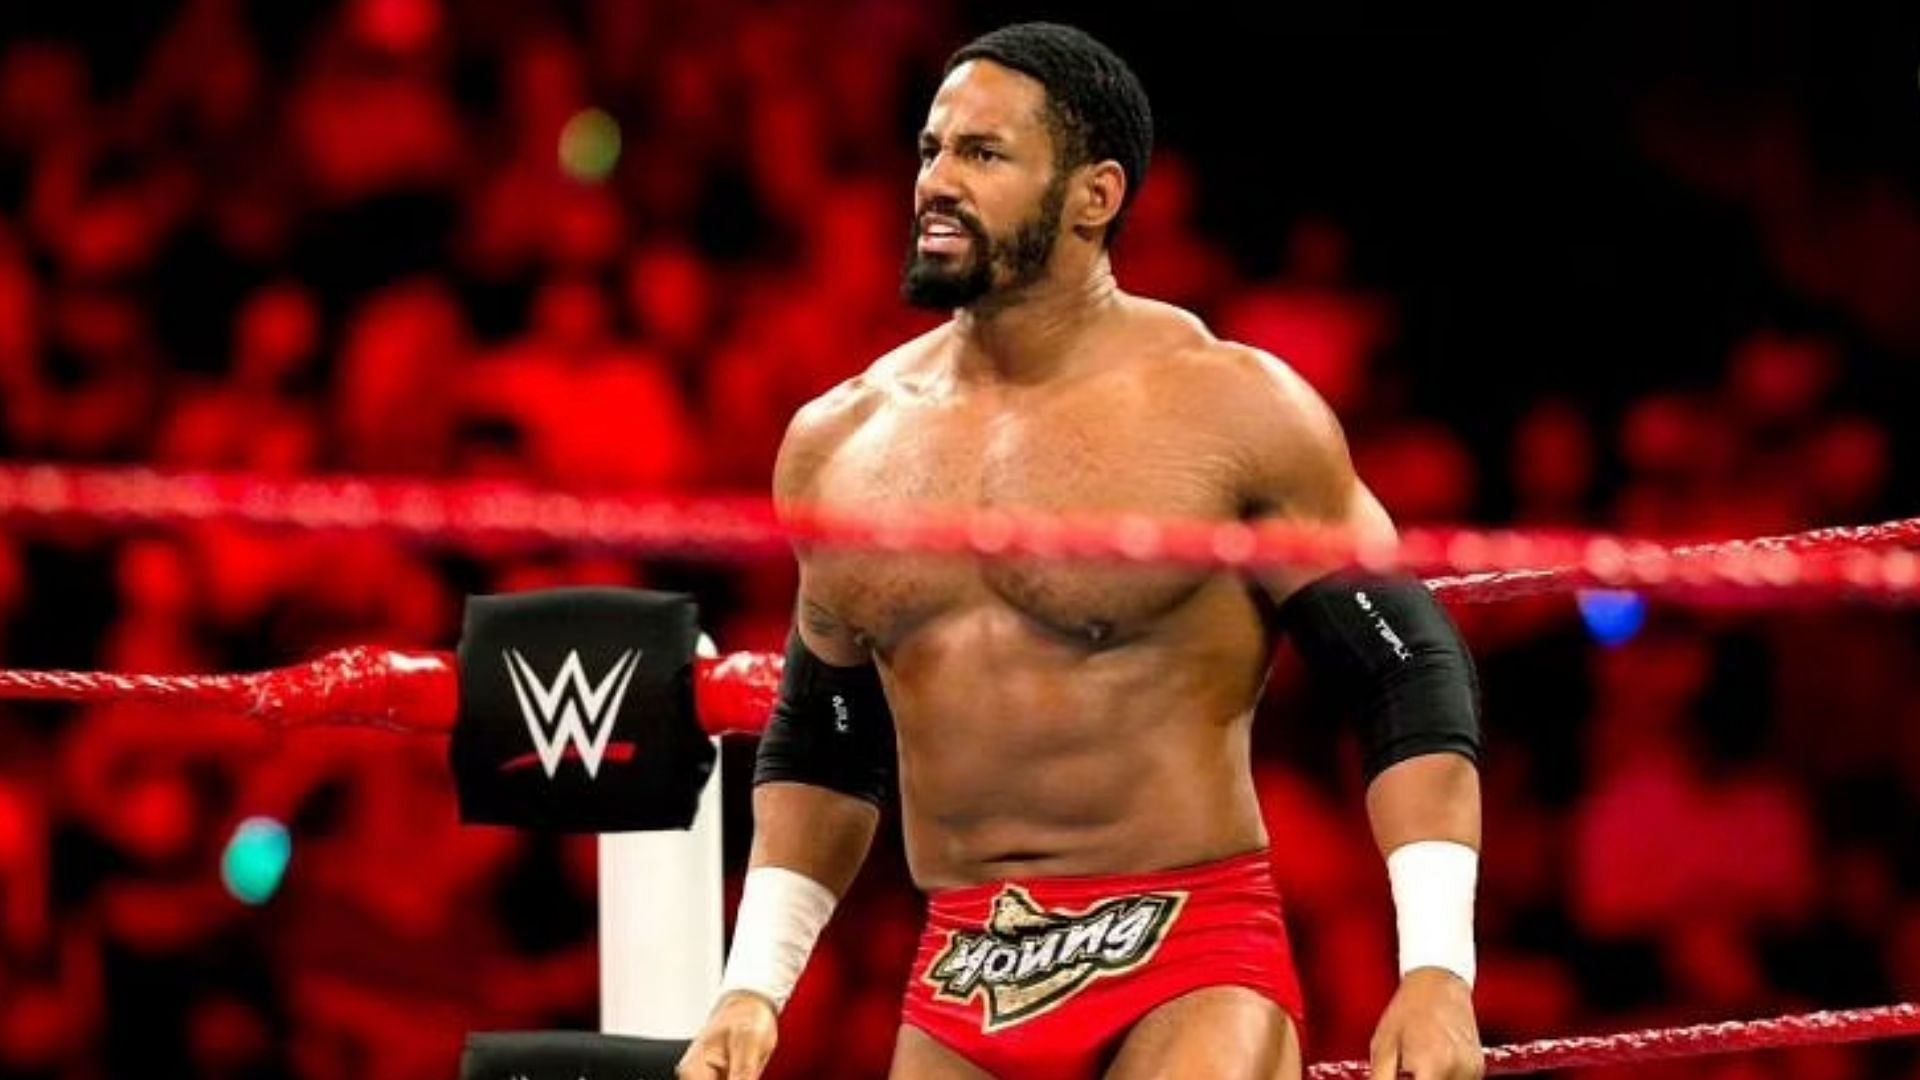 Former WWE Superstar Darren Young in the ring for a match on RAW